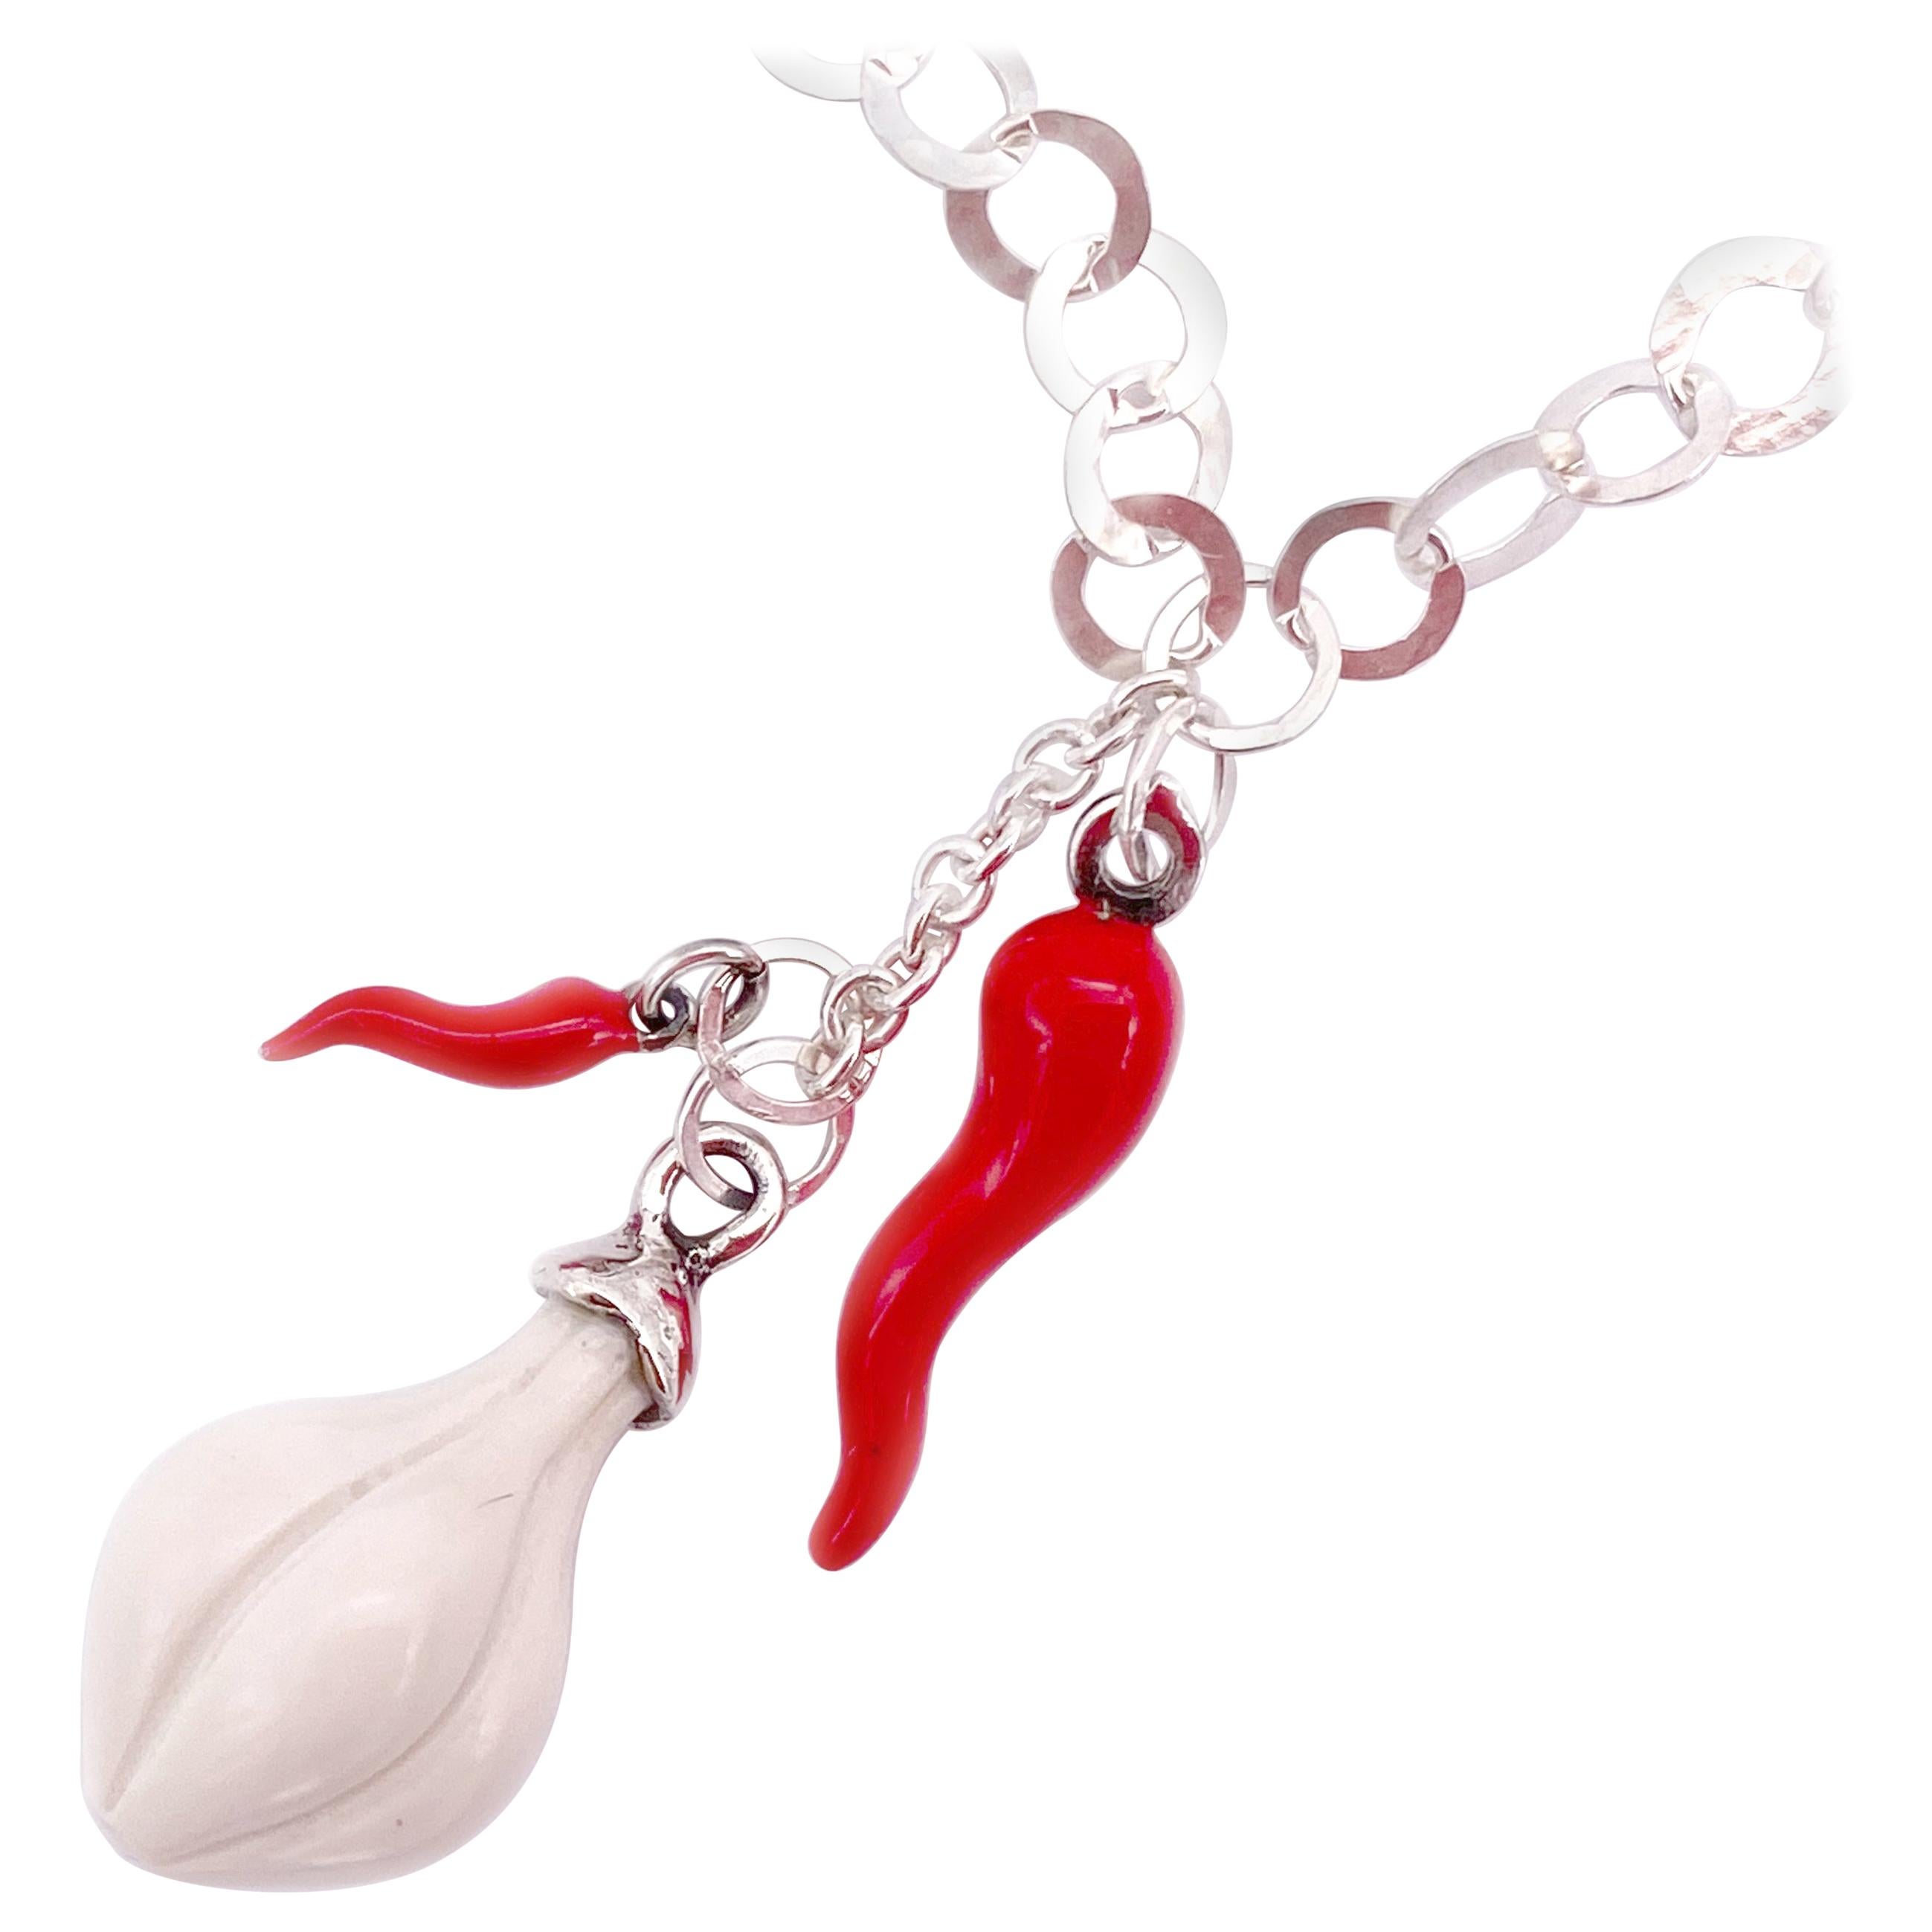 Red Chili Pepper & Garlic Silver Starling Lucky Chain Amulet Pendant Necklace For Sale